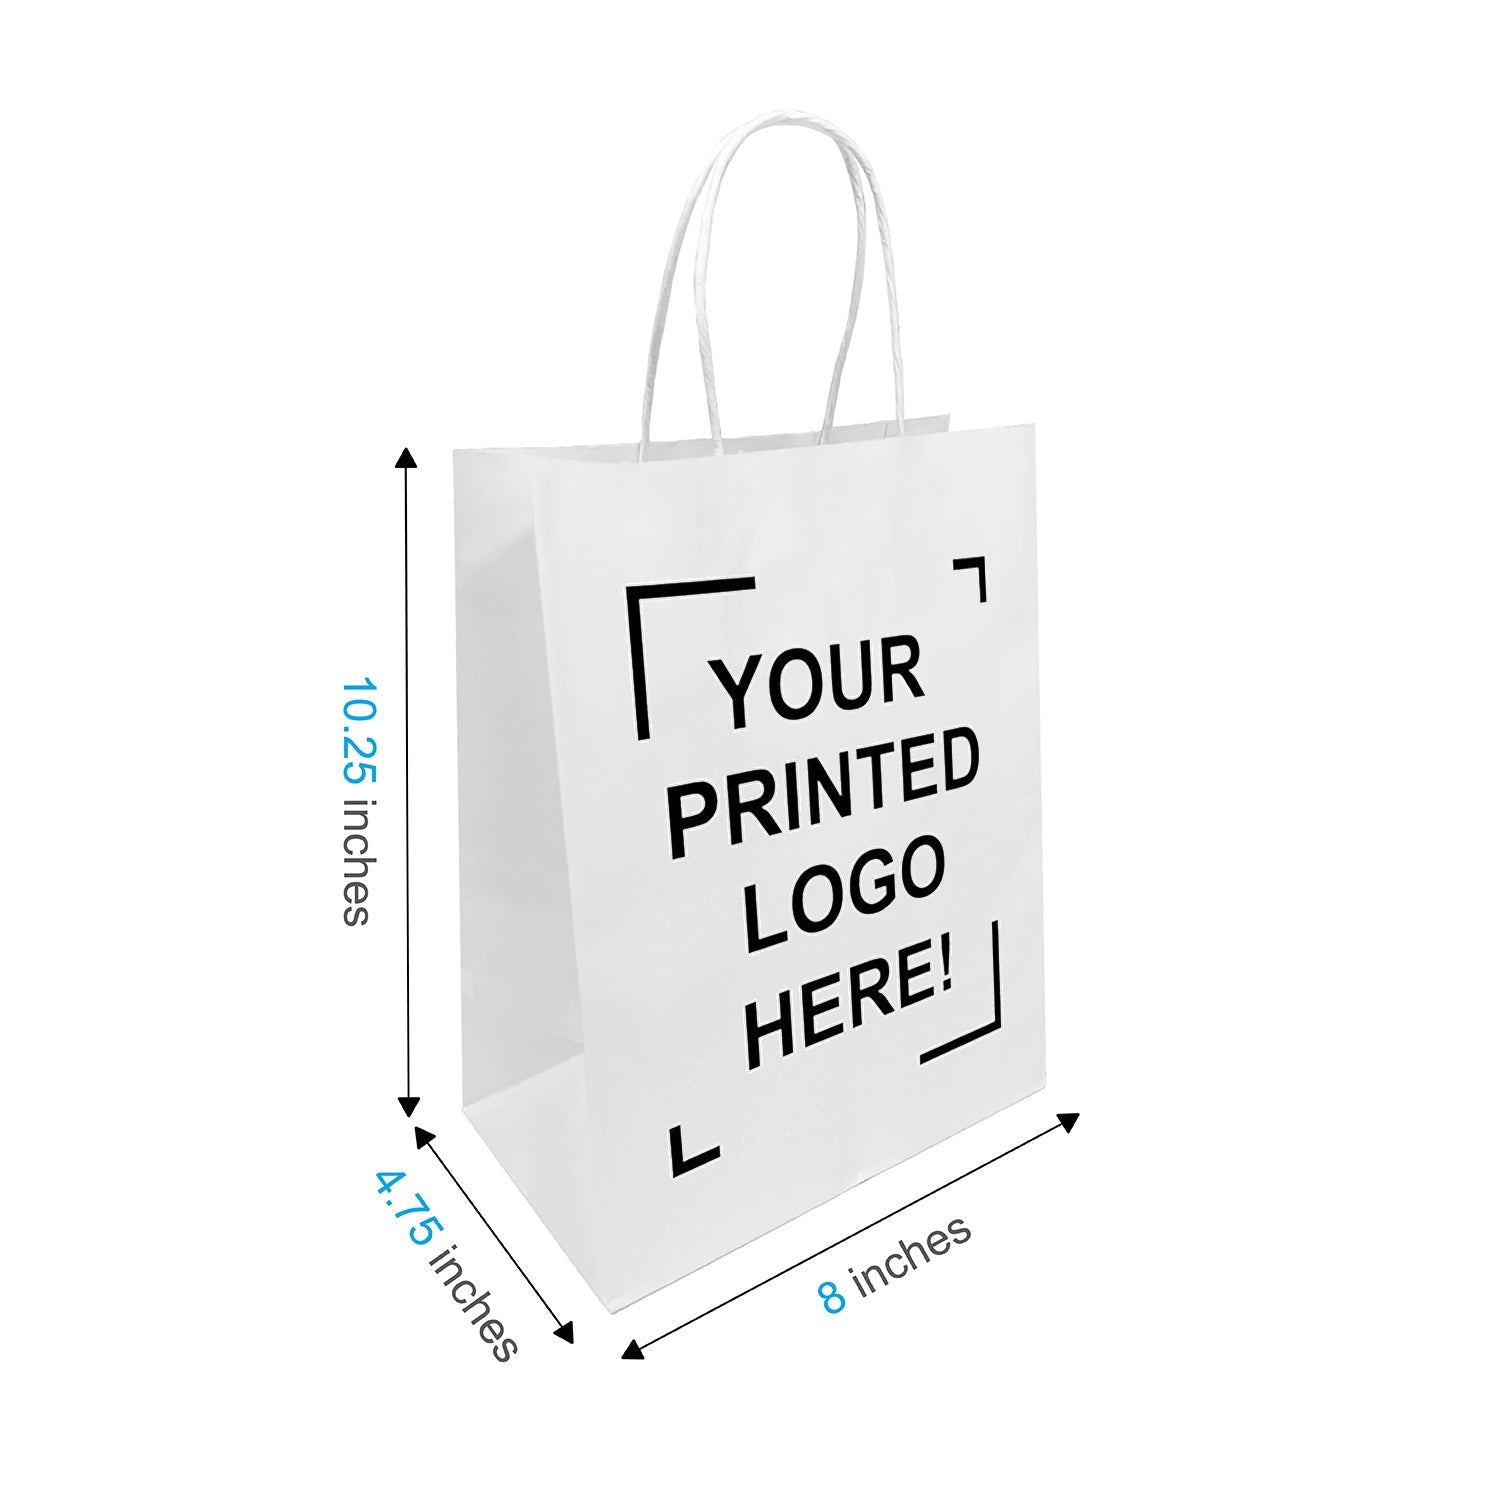 250 Pcs, Cub, 8x4.75x10.25 inches, White Paper Bags, with Twisted Handle, Full Color Custom Print